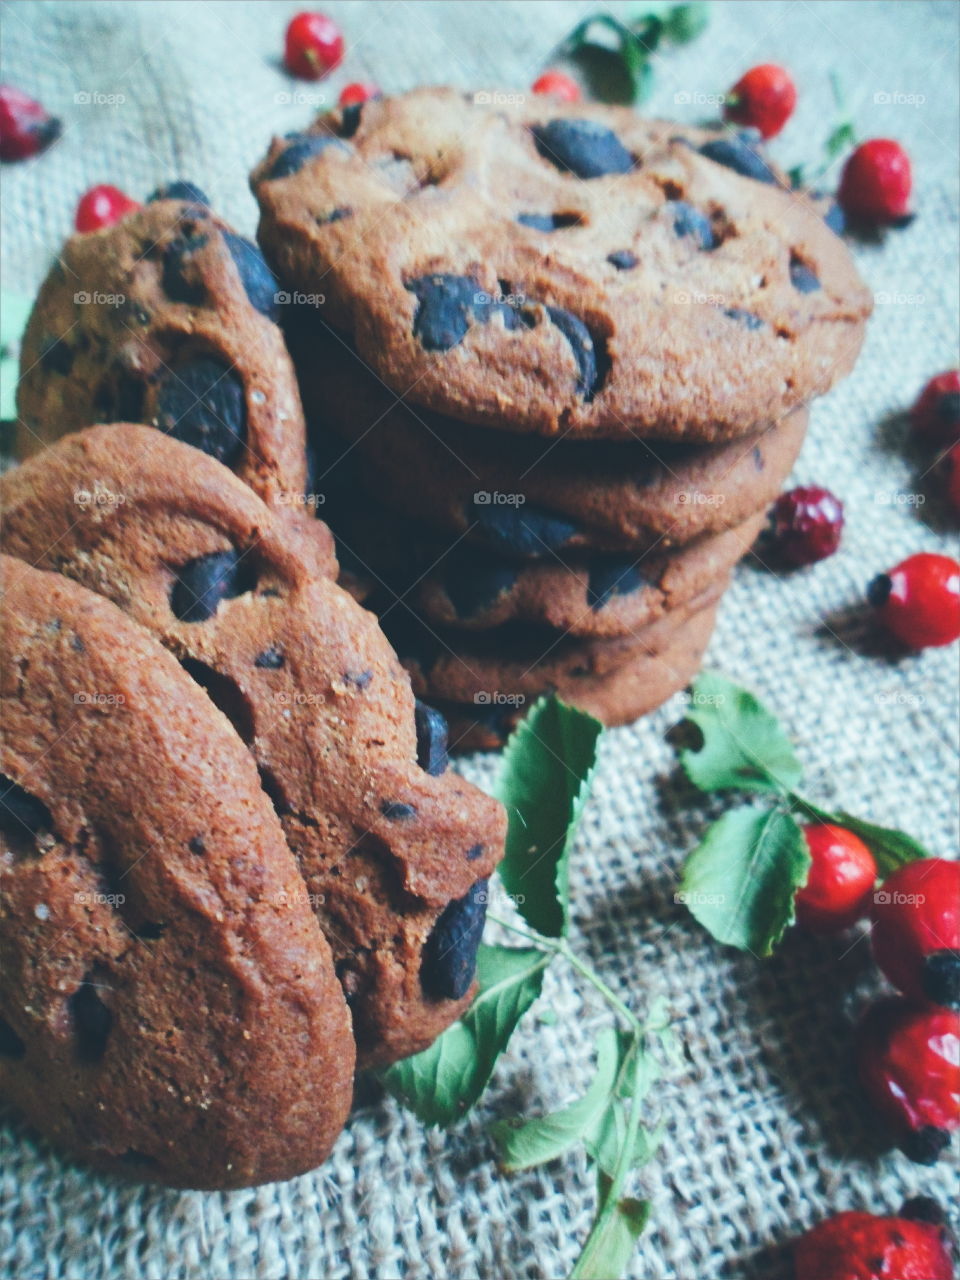 oatmeal cookies with chunks of chocolate and rose hips, dessert